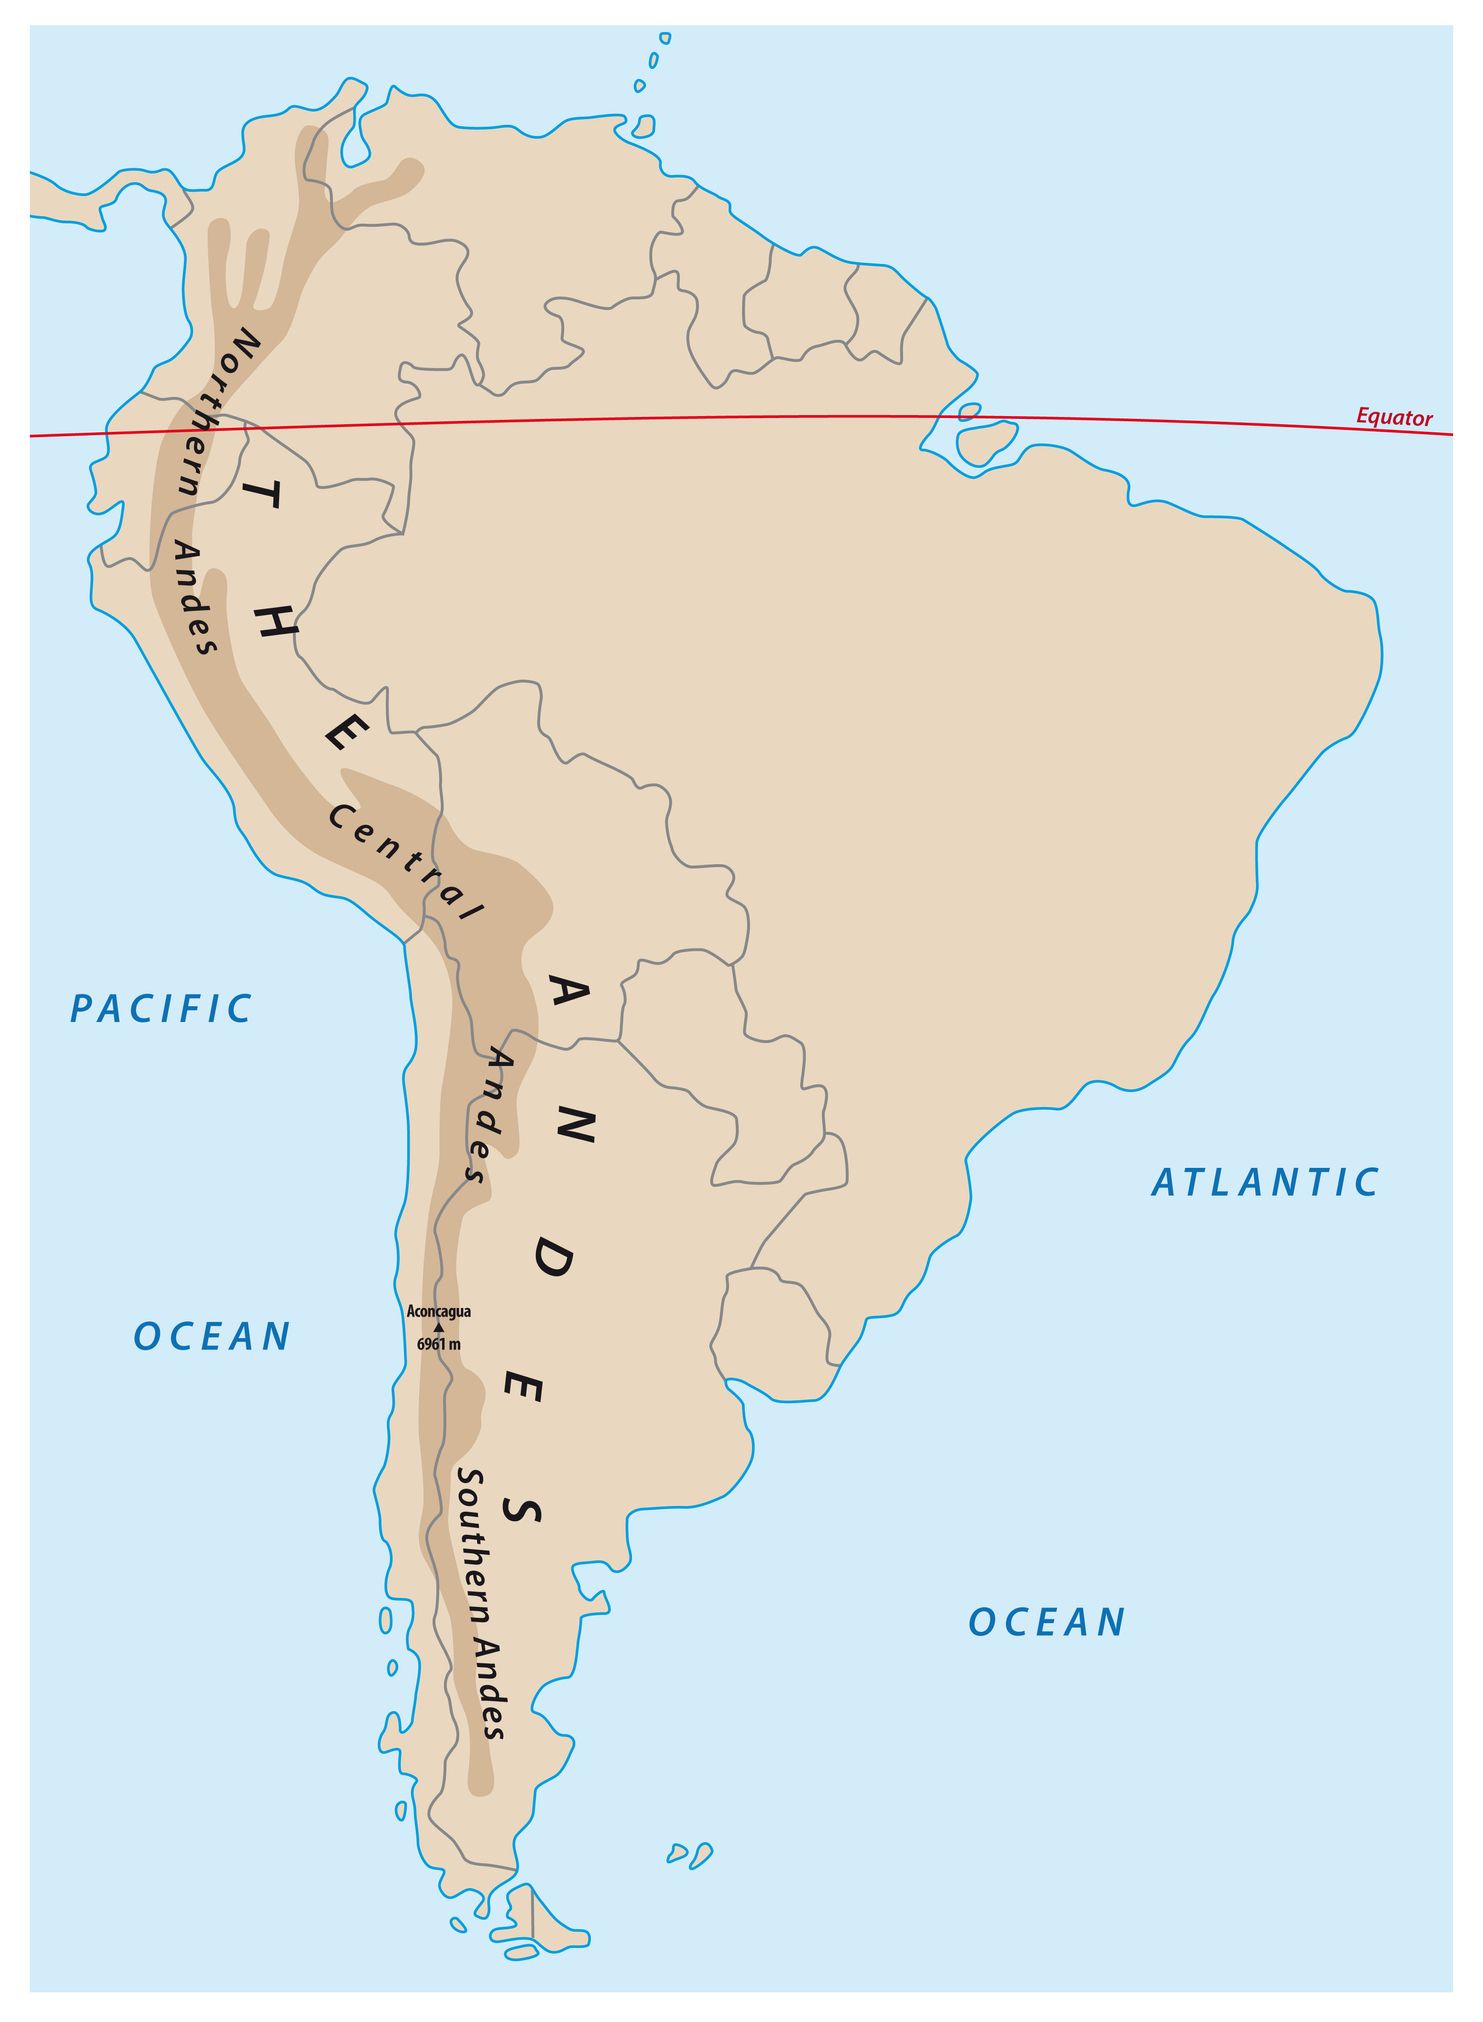 A map of the Andes Mountains in South America.